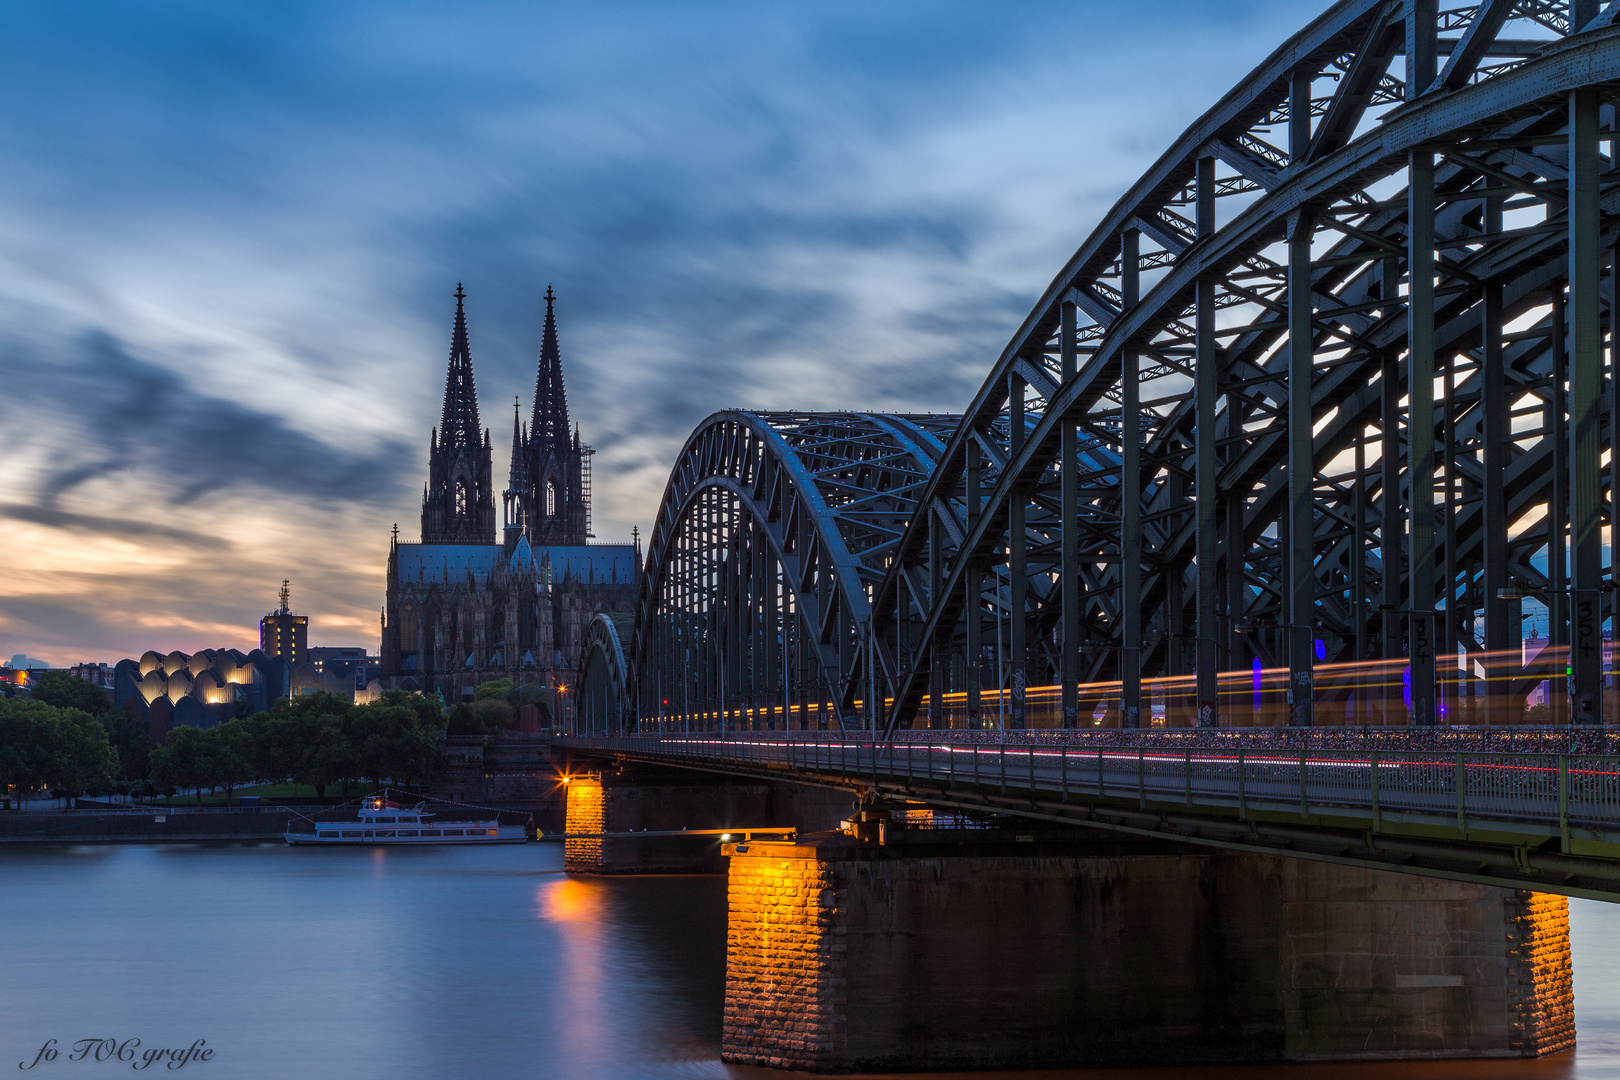 Kölner Dom between day and night